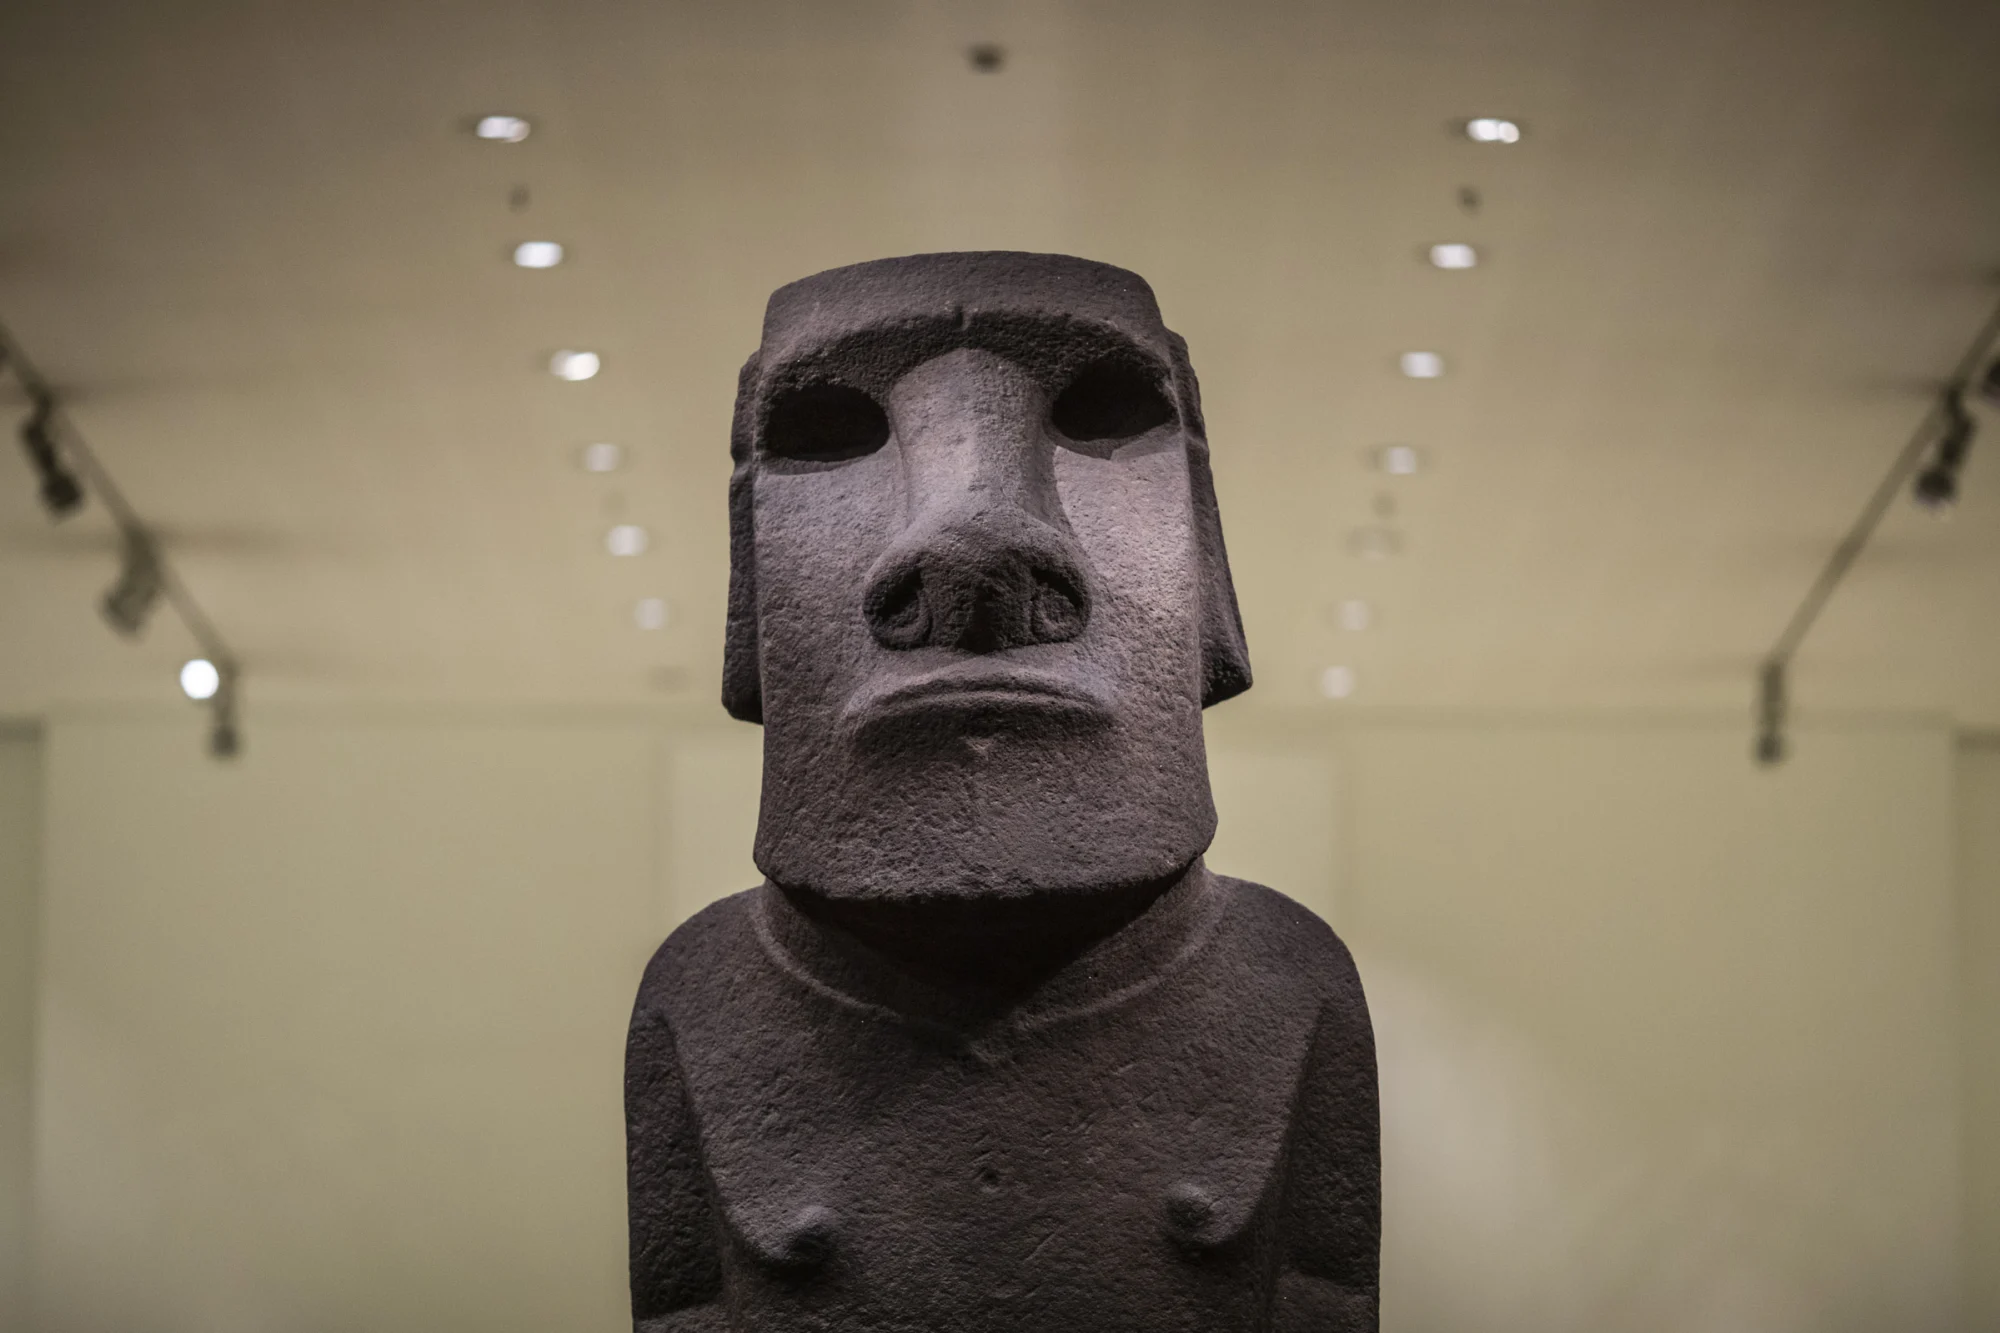 Activists bombard the British Museum's social media with calls to return the Easter Island statue